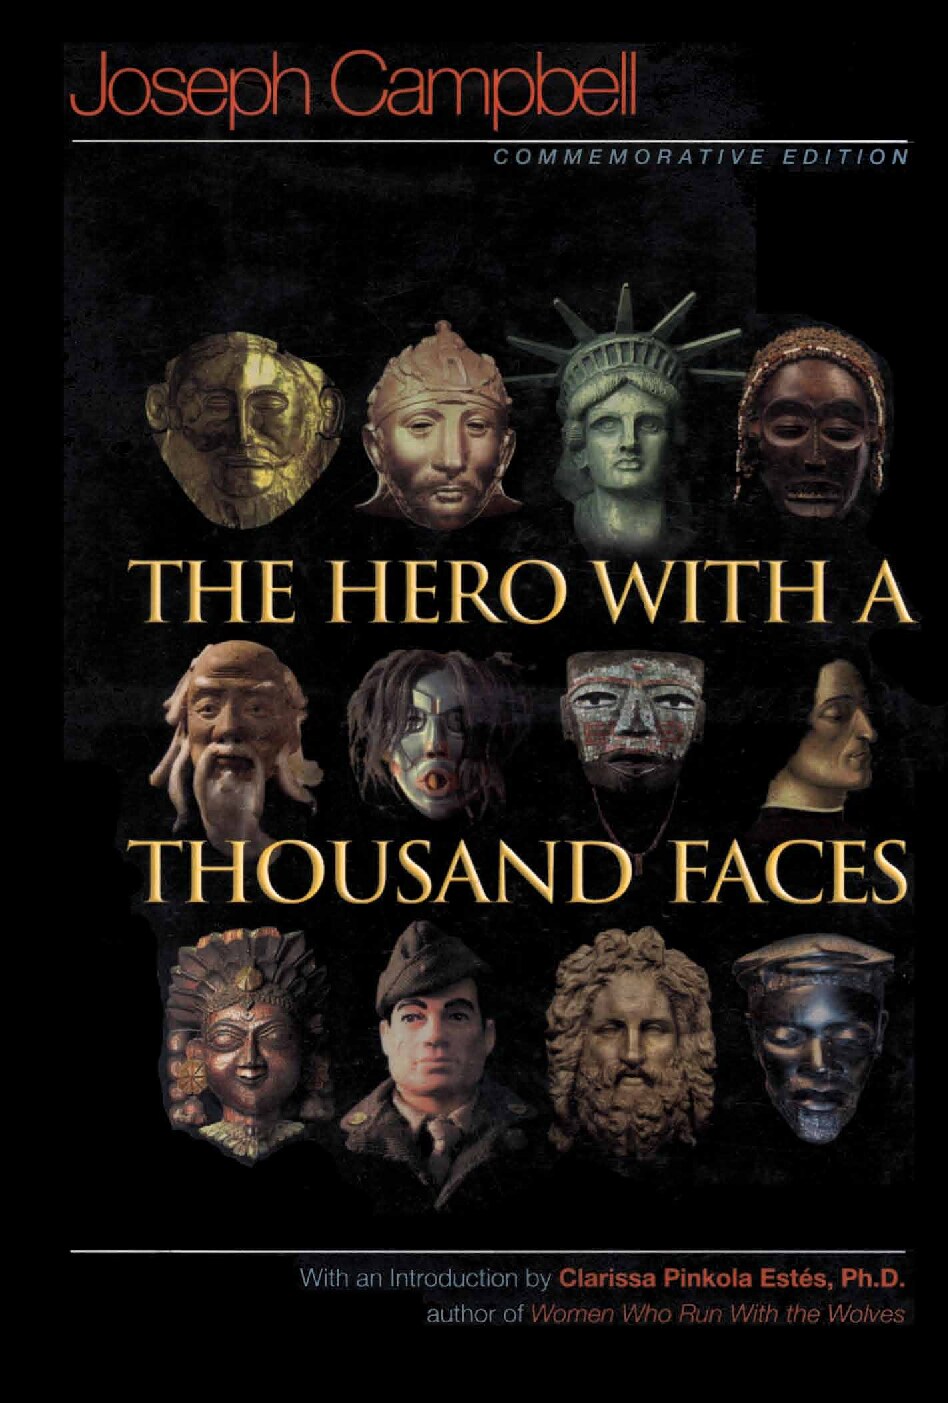 The Hero With A Thousand Faces, Commemorative Edition (Princeton University Press; 2004)